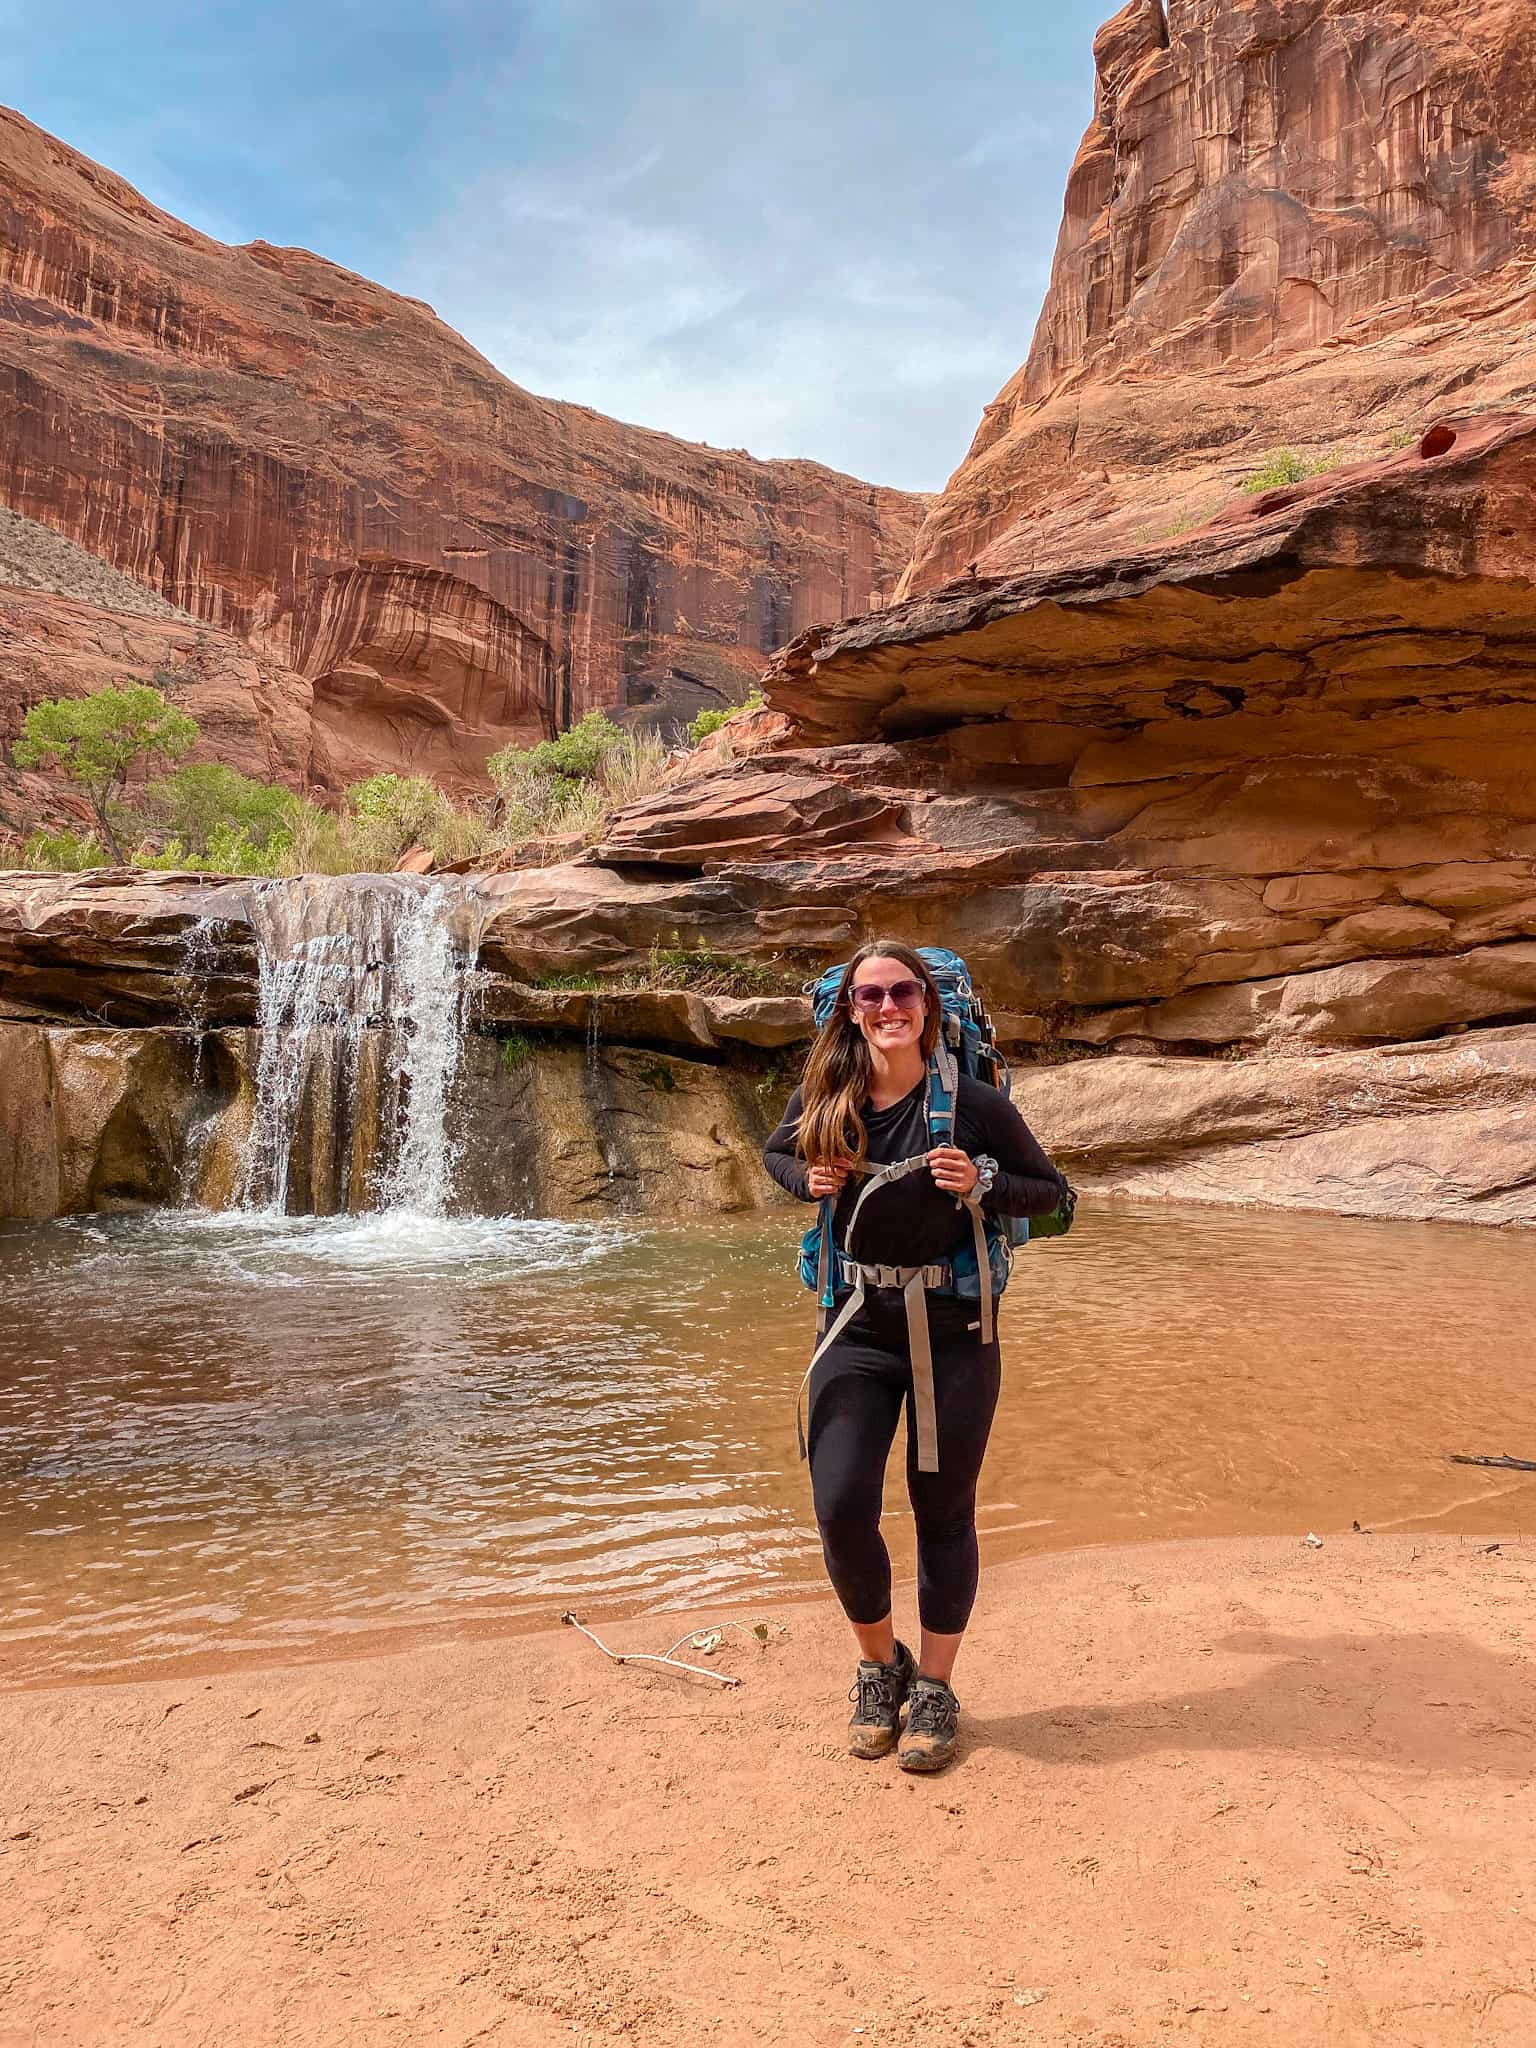 Woman wearing a long sleeve black shirt, black leggings, sunglasses, and a large blue backpacking pack stands in front of a waterfall in an orange sandstone canyon while backpacking in Coyote Gulch in Escalante, Utah.